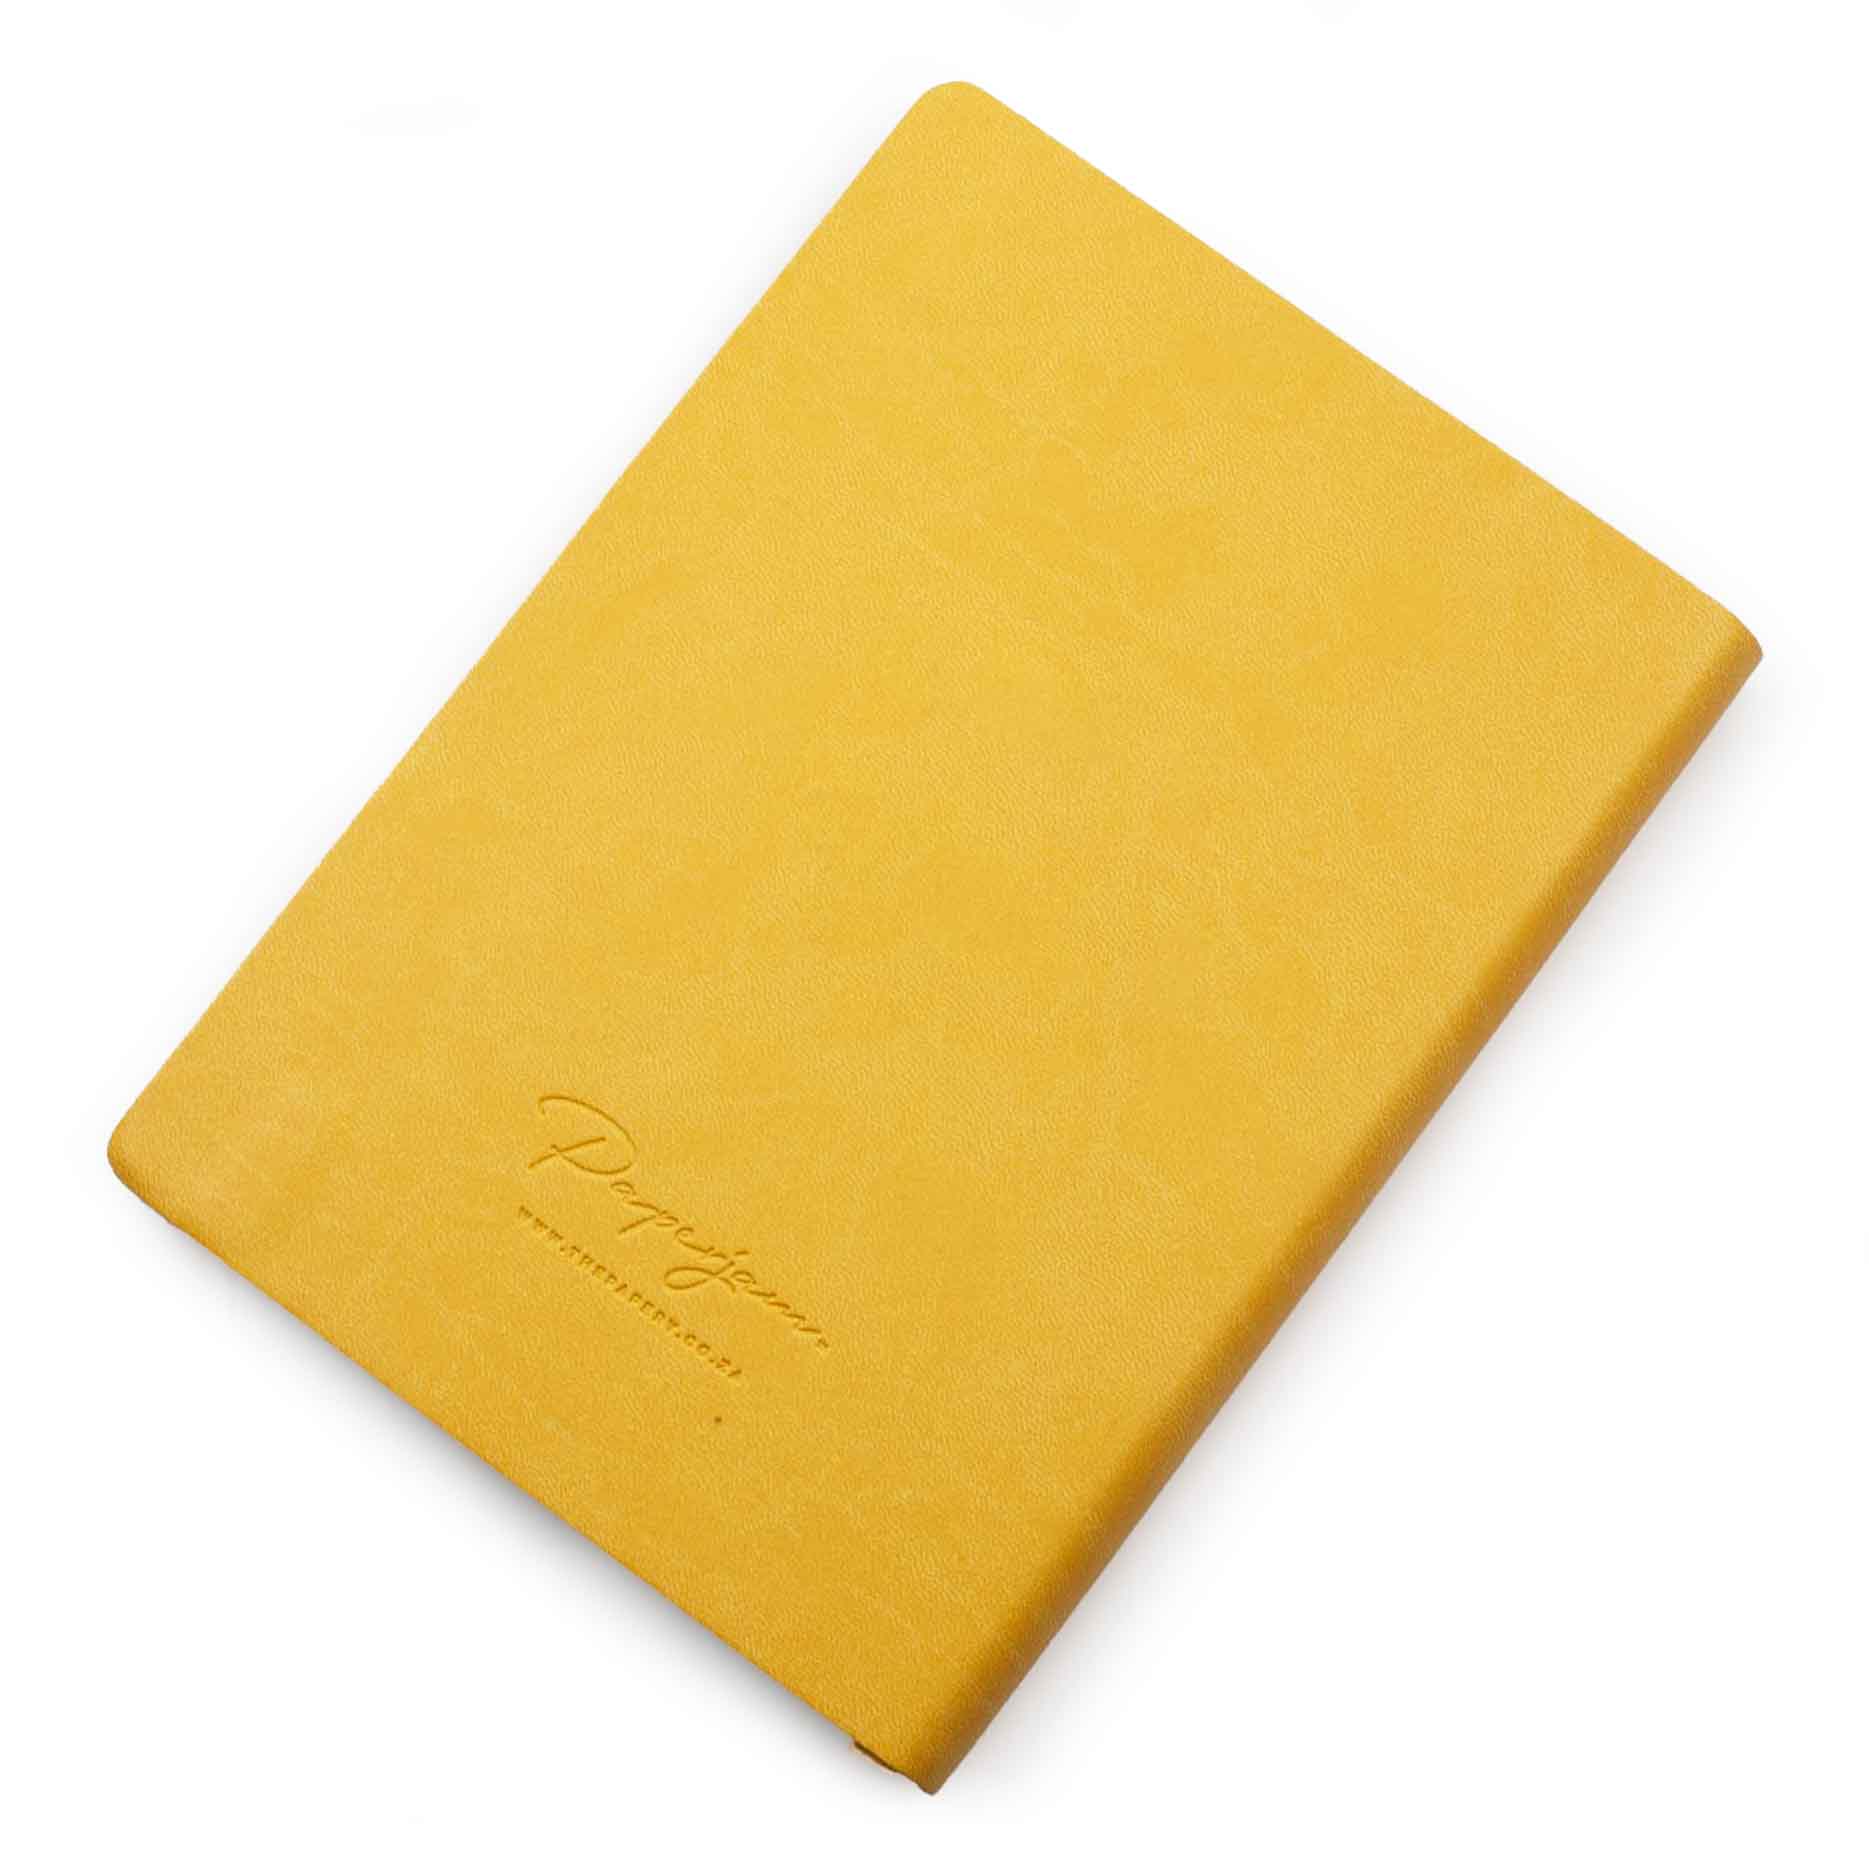 Image shows the back cover of a yellow Flexi Premium journal